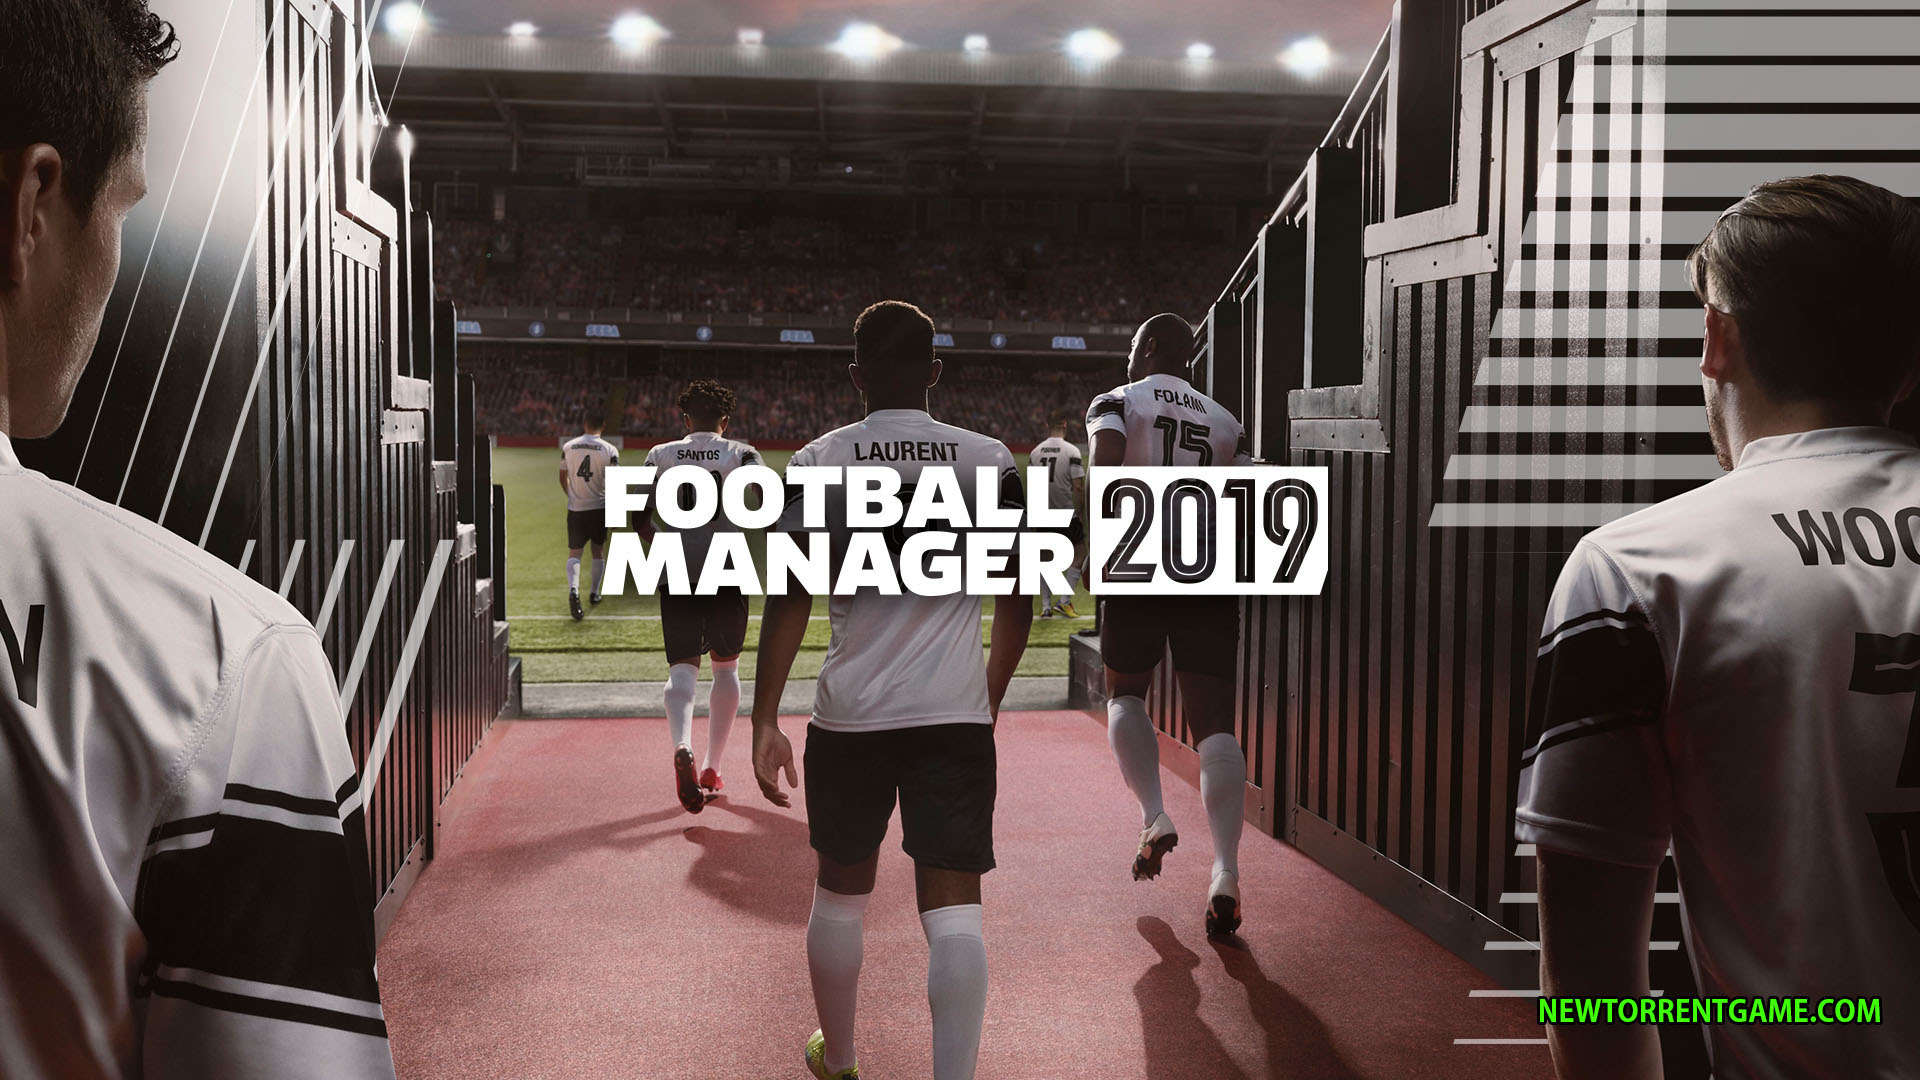 FOOTBALL MANAGER 2019 CPY - FREE TORRENT CRACK DOWNLOAD ...